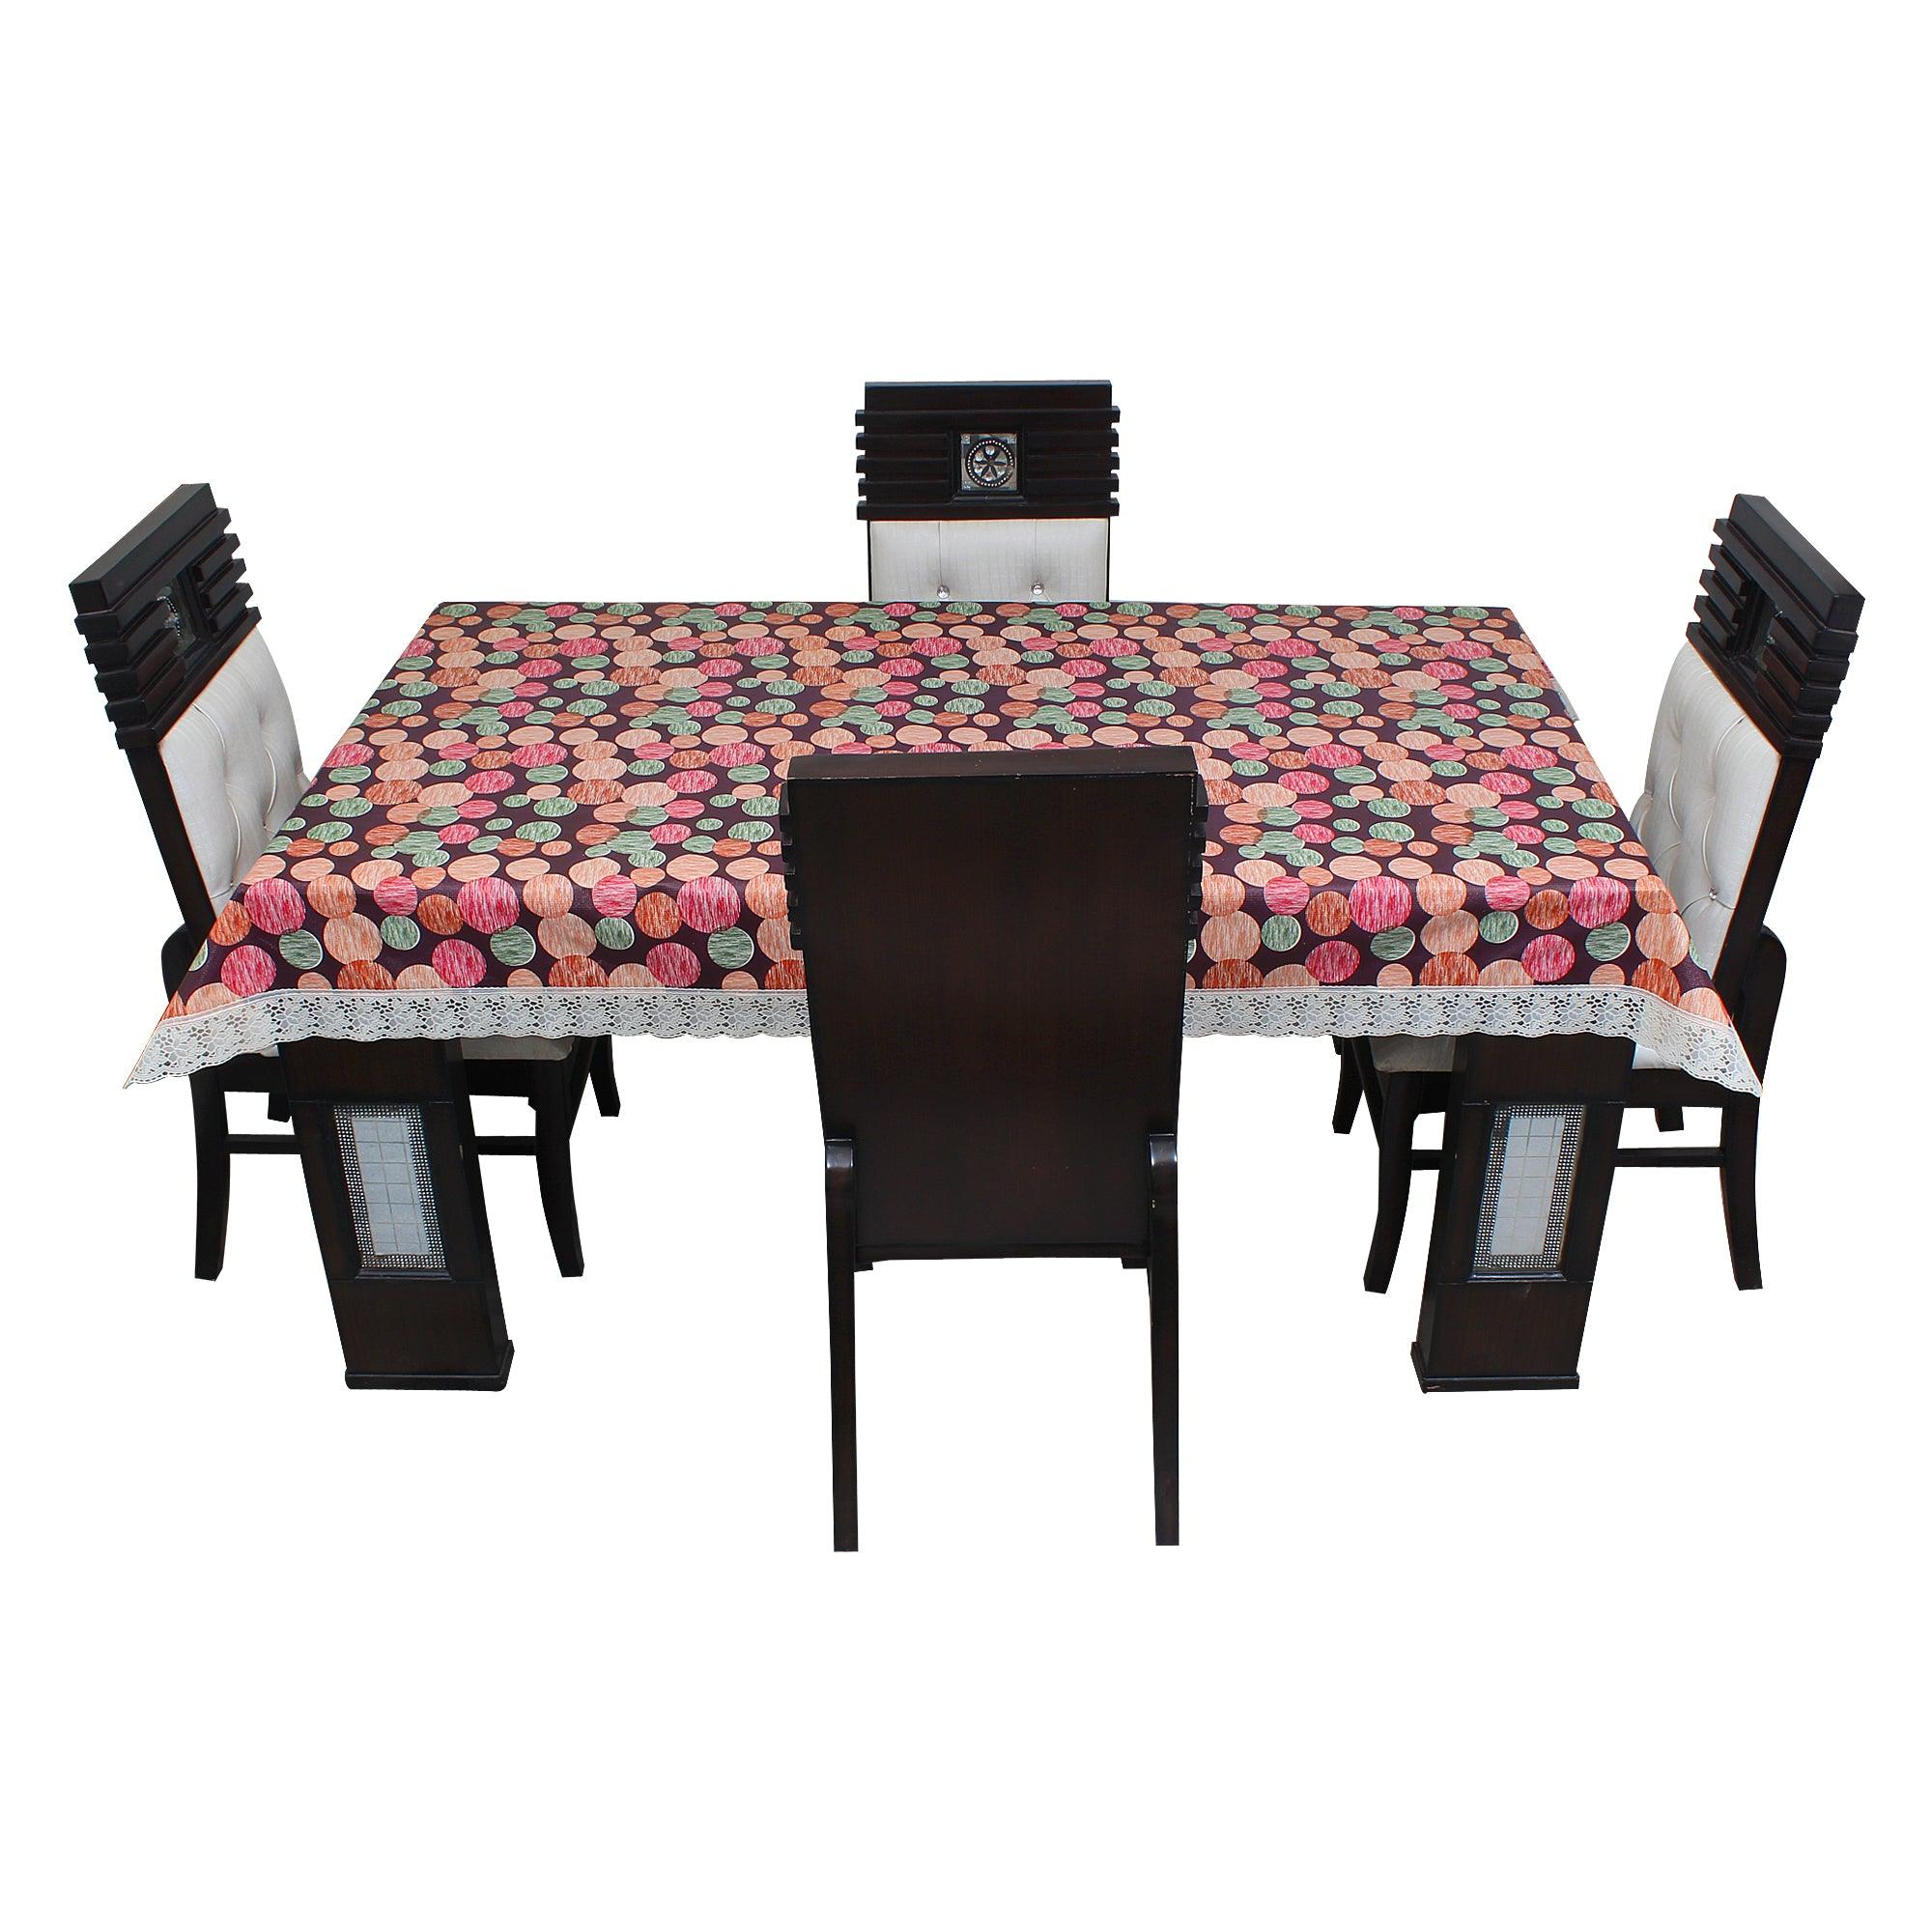 Waterproof and Dustproof Dining Table Cover, SA66 - Dream Care Furnishings Private Limited